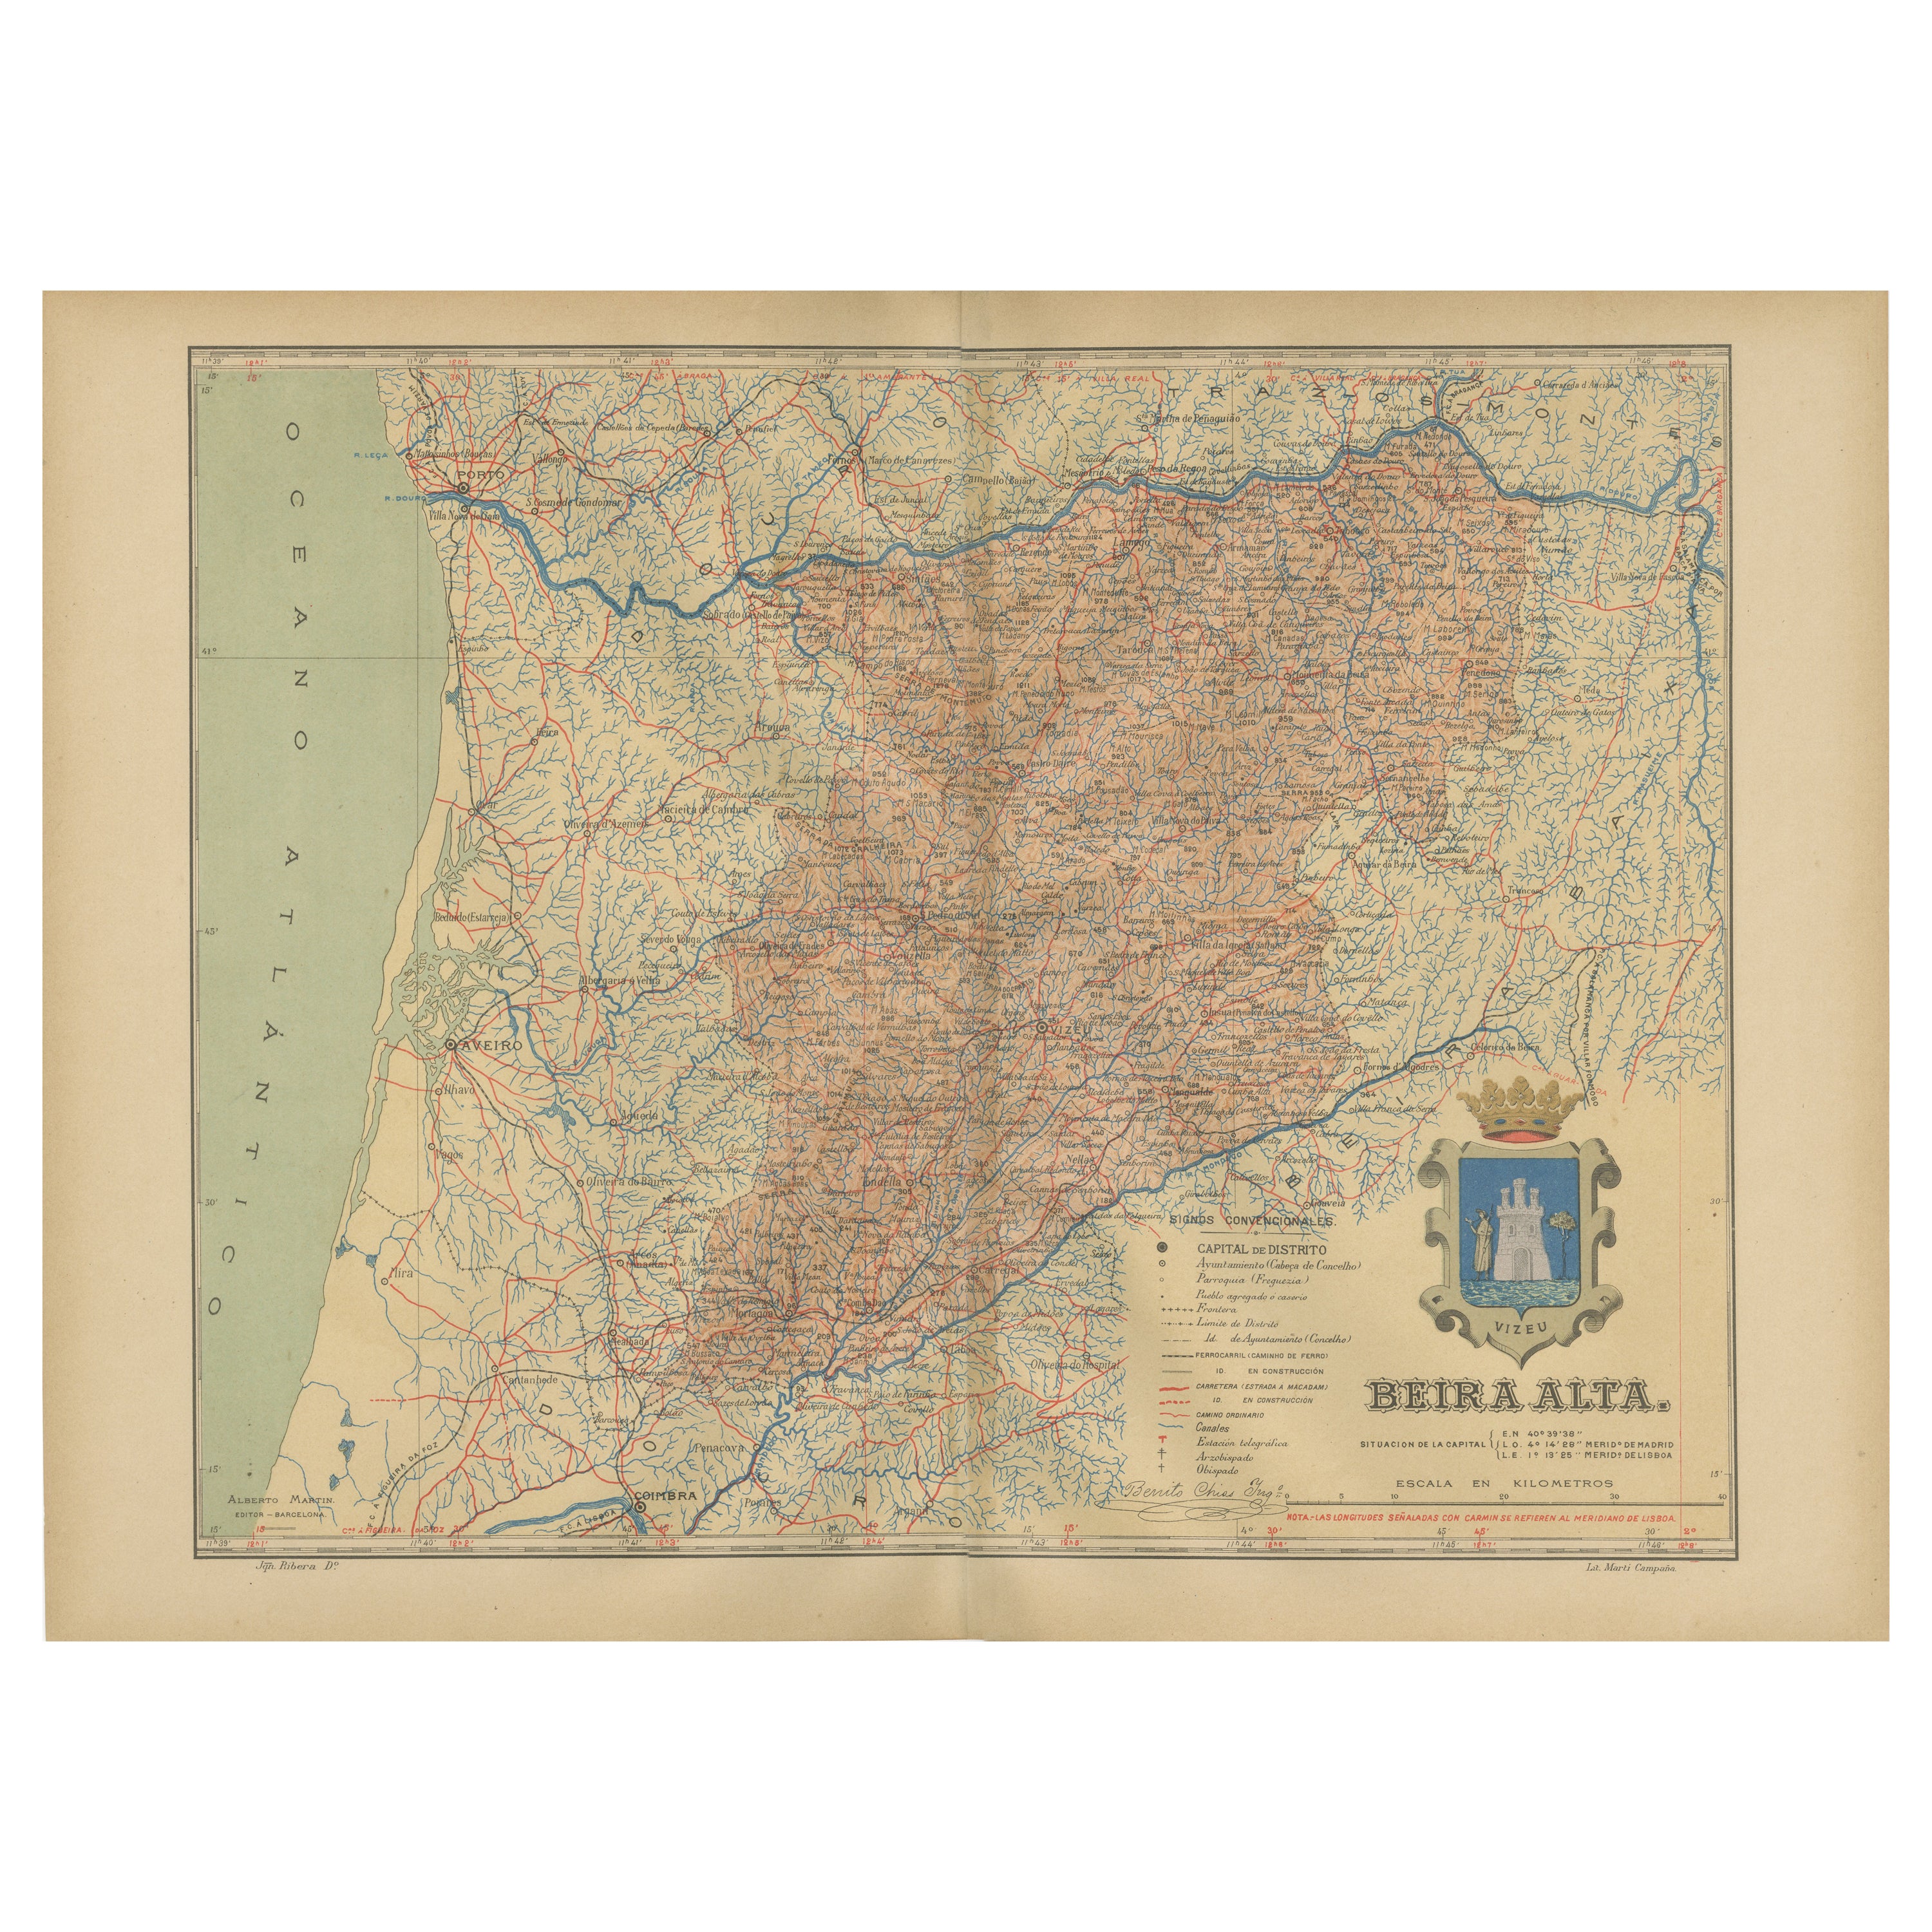 Beira Alta: A Cartographic Journey Through Portugal's Heartland in 1903 For Sale